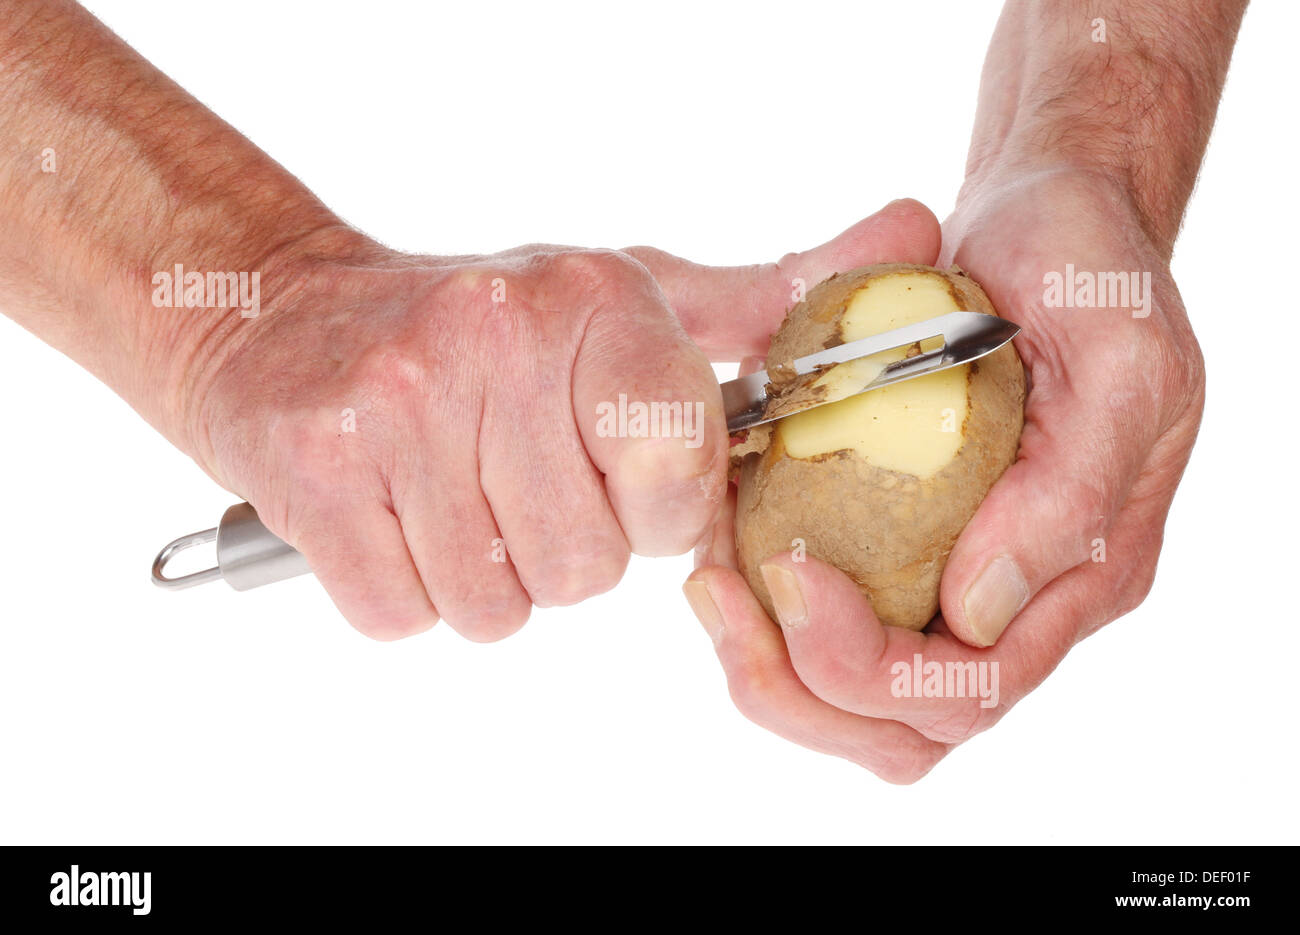 Process peeling potato with knife Royalty Free Vector Image